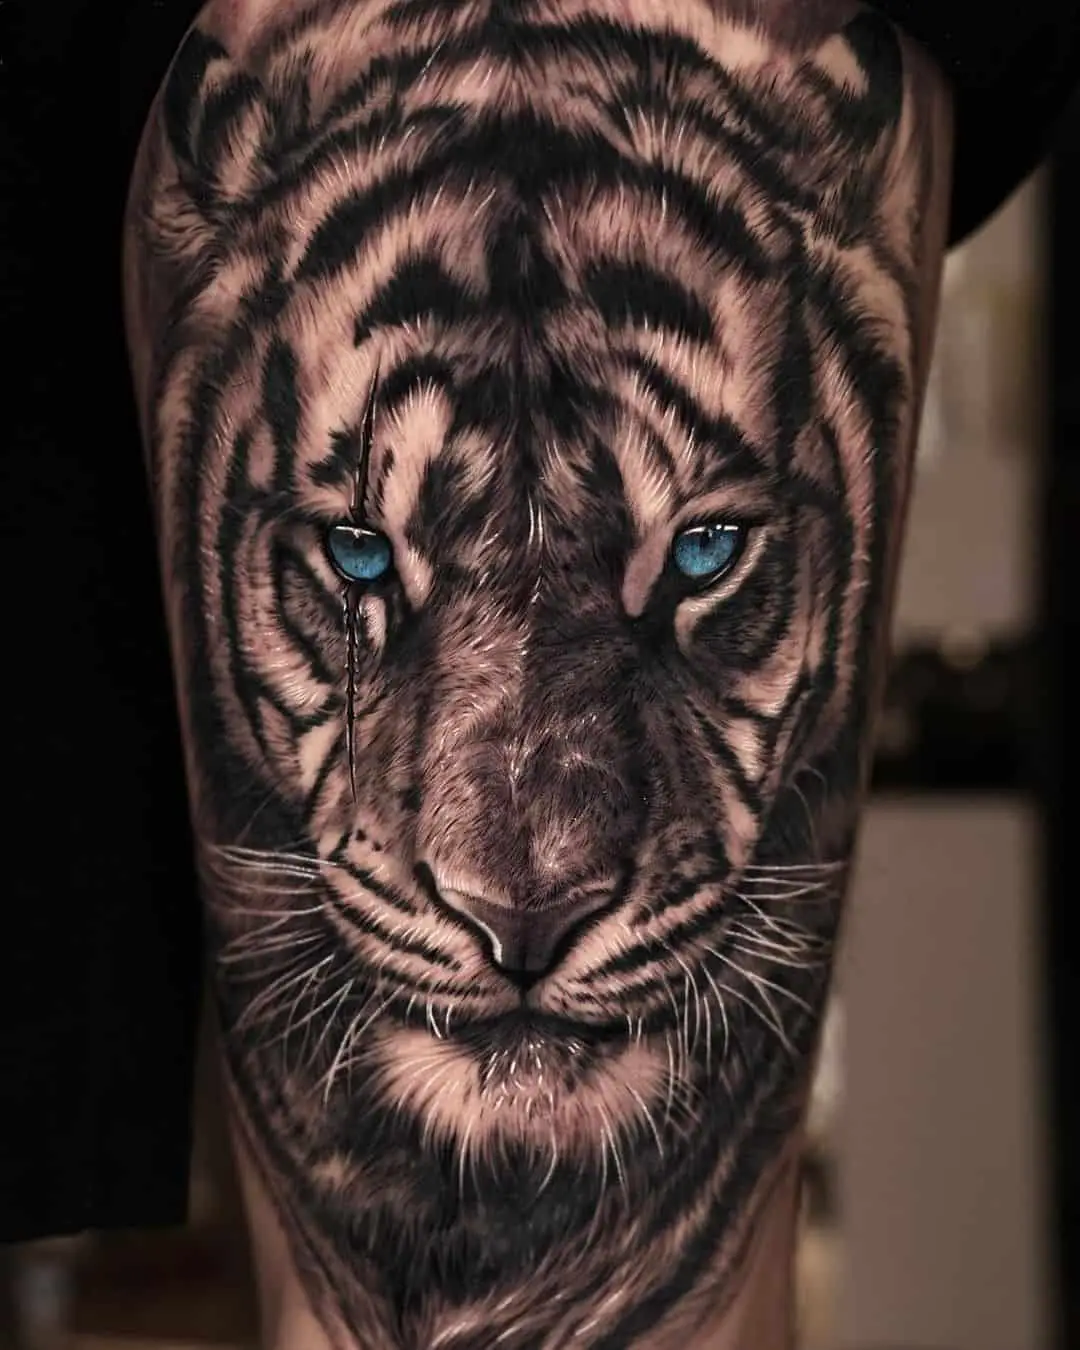 Amazing Tiger face tattoo by sumok tattooer